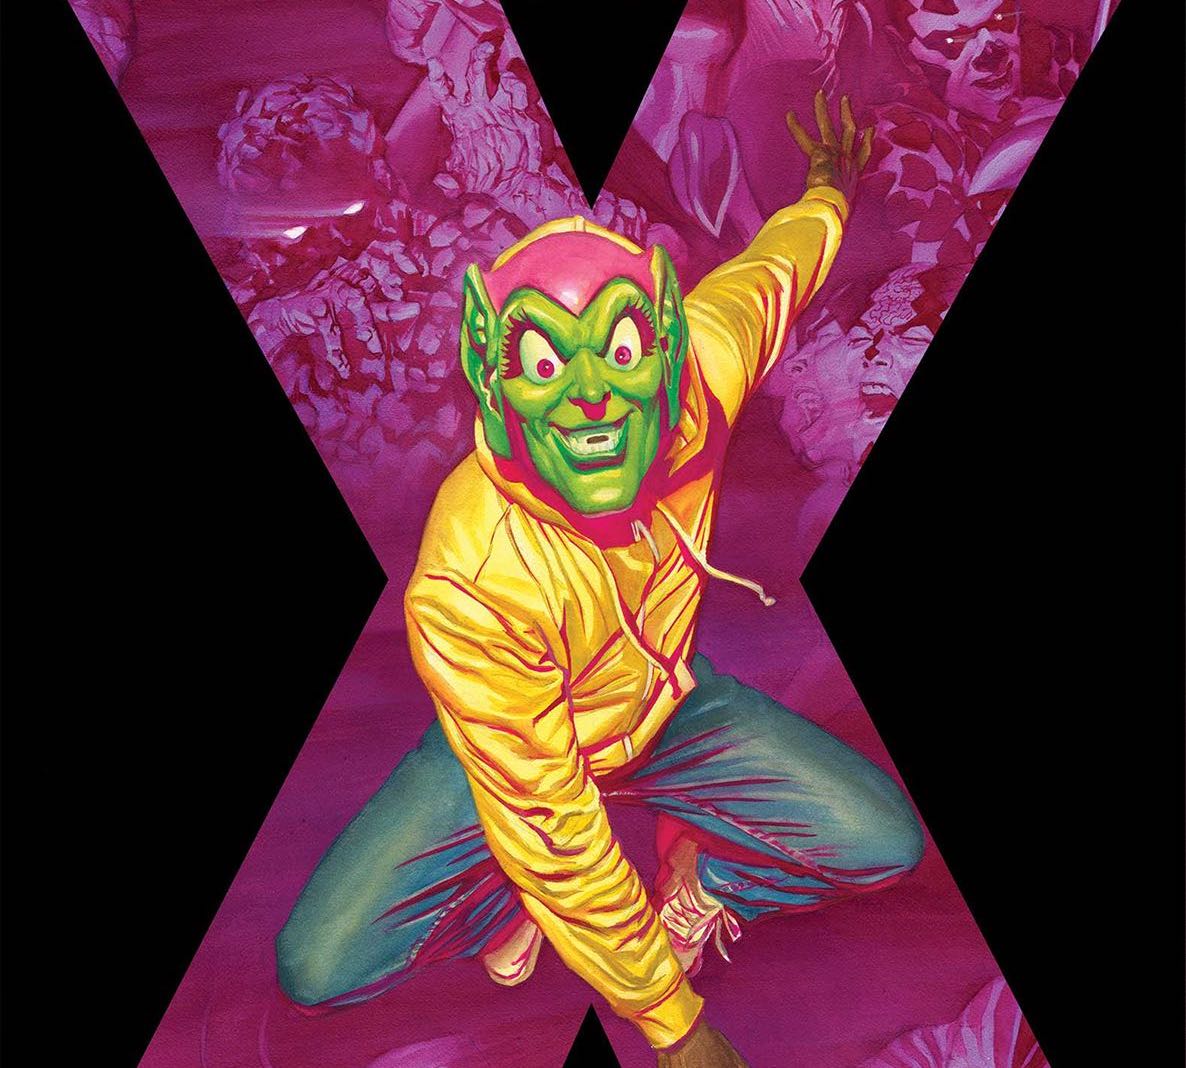 Marvels X #1 review: a deeply human story